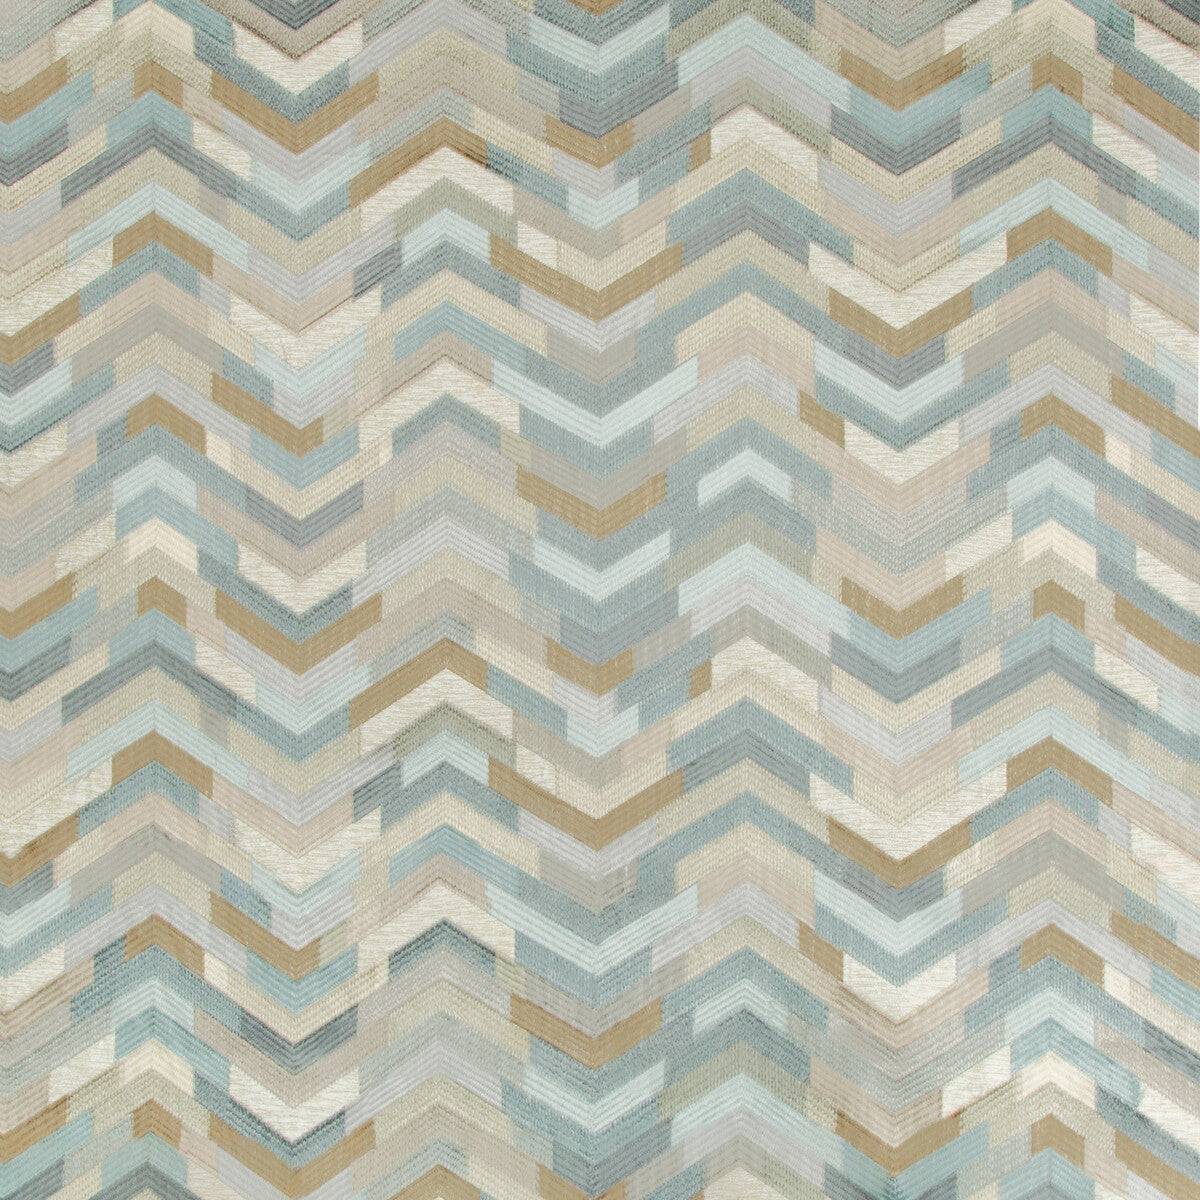 Catwalk fabric in chambray color - pattern 34930.516.0 - by Kravet Couture in the Modern Tailor collection